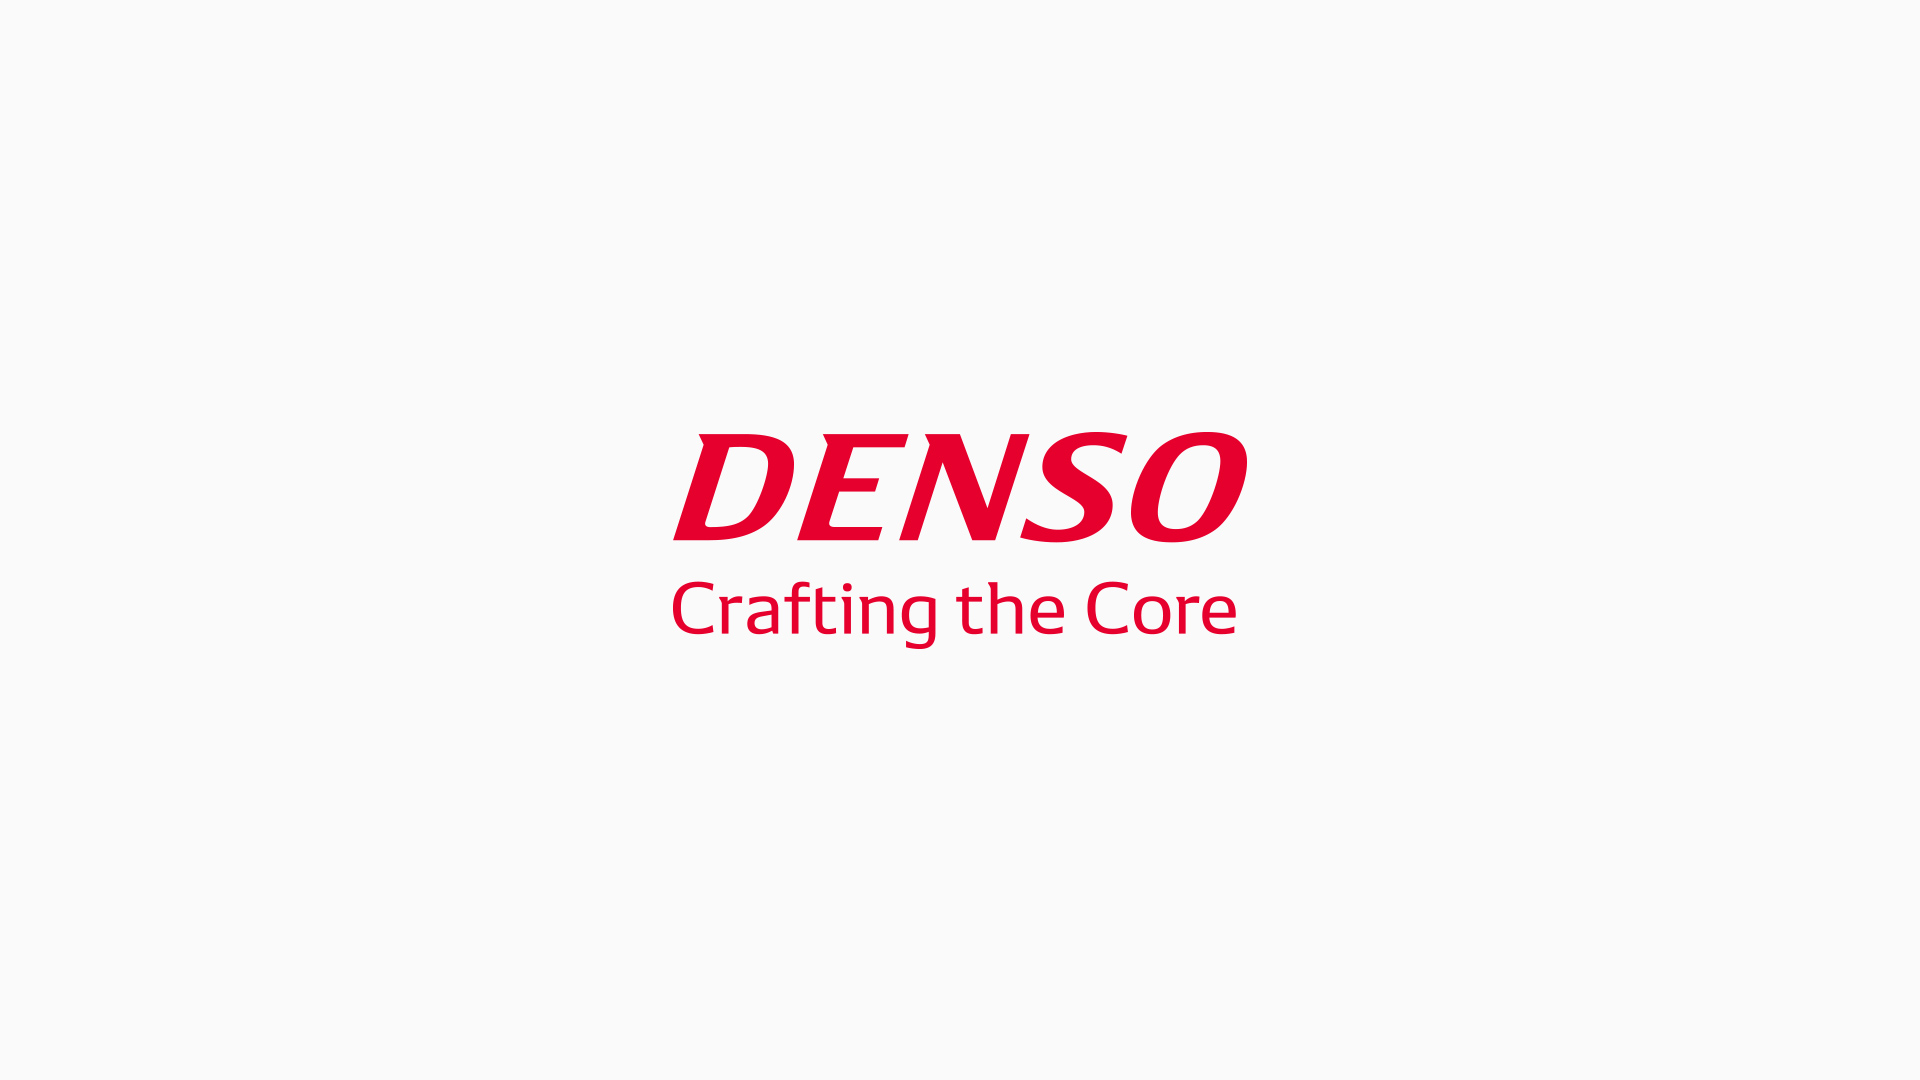 TOYOTA Free/Open Source Software Website | DENSO Global ...